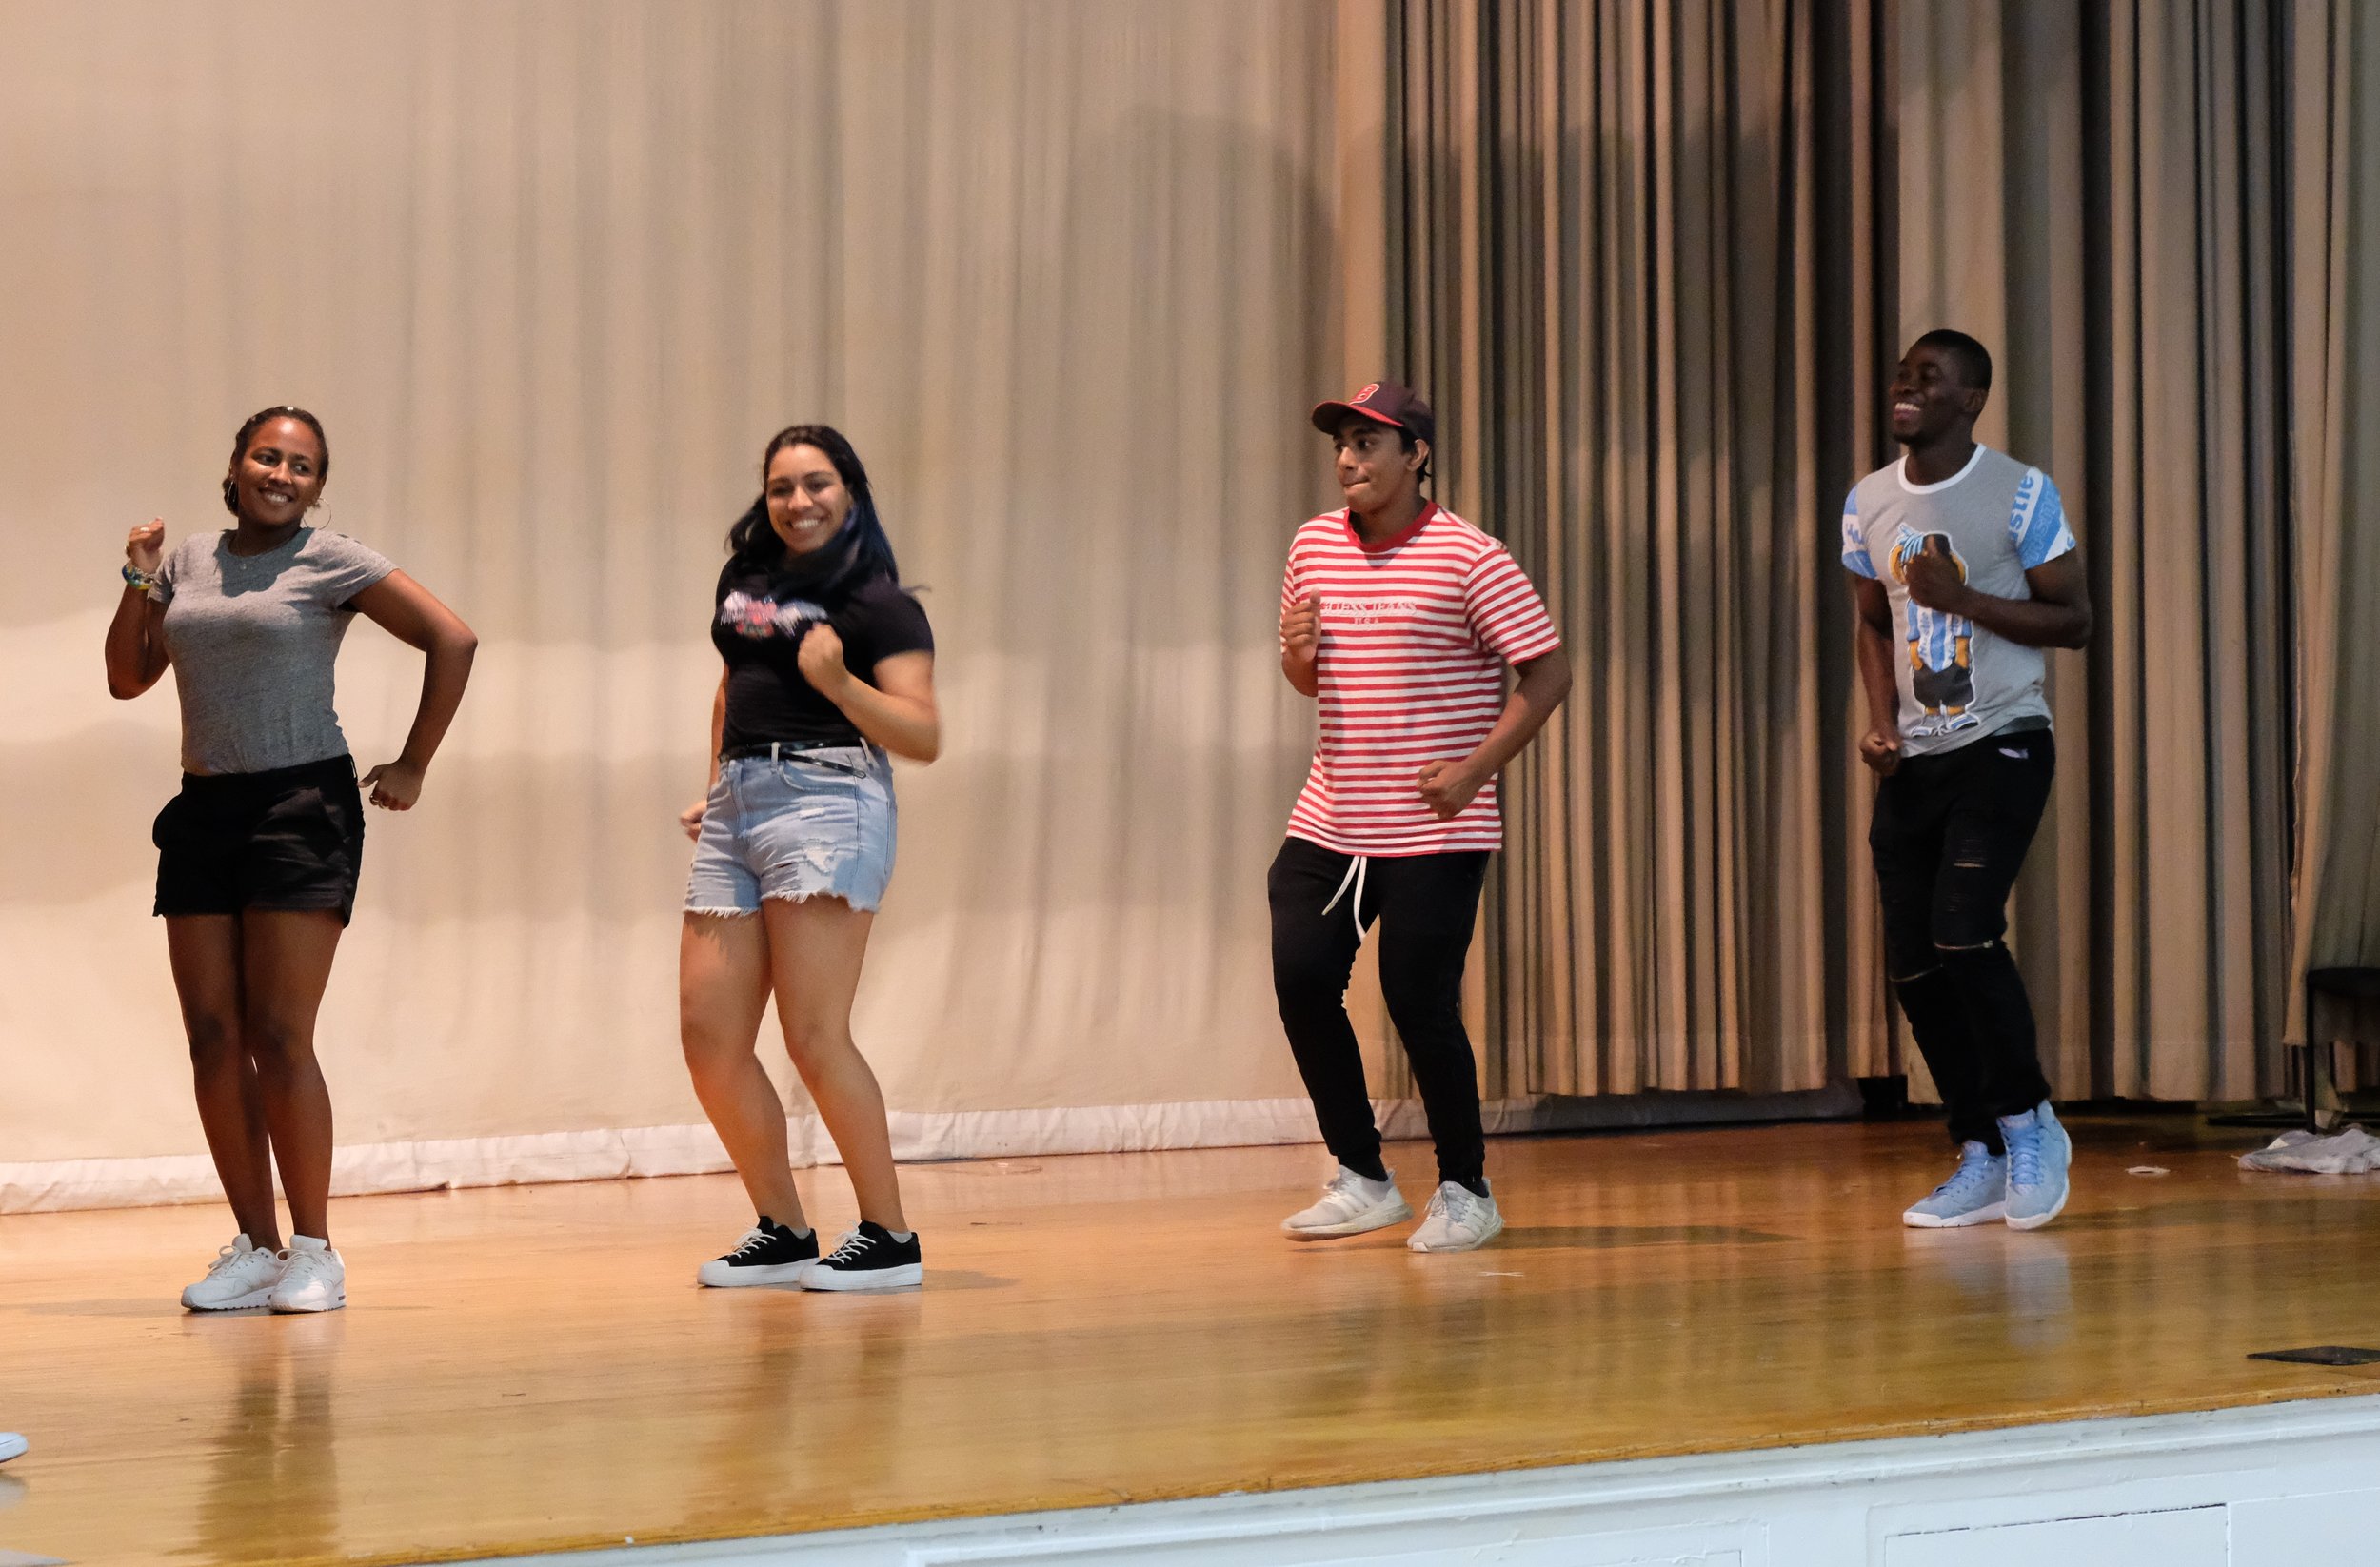  Each summer, counselors and students participate in a camp-wide talent show! In 2019, Zeñia and a few other counselors performed a choreographed dance routine. 